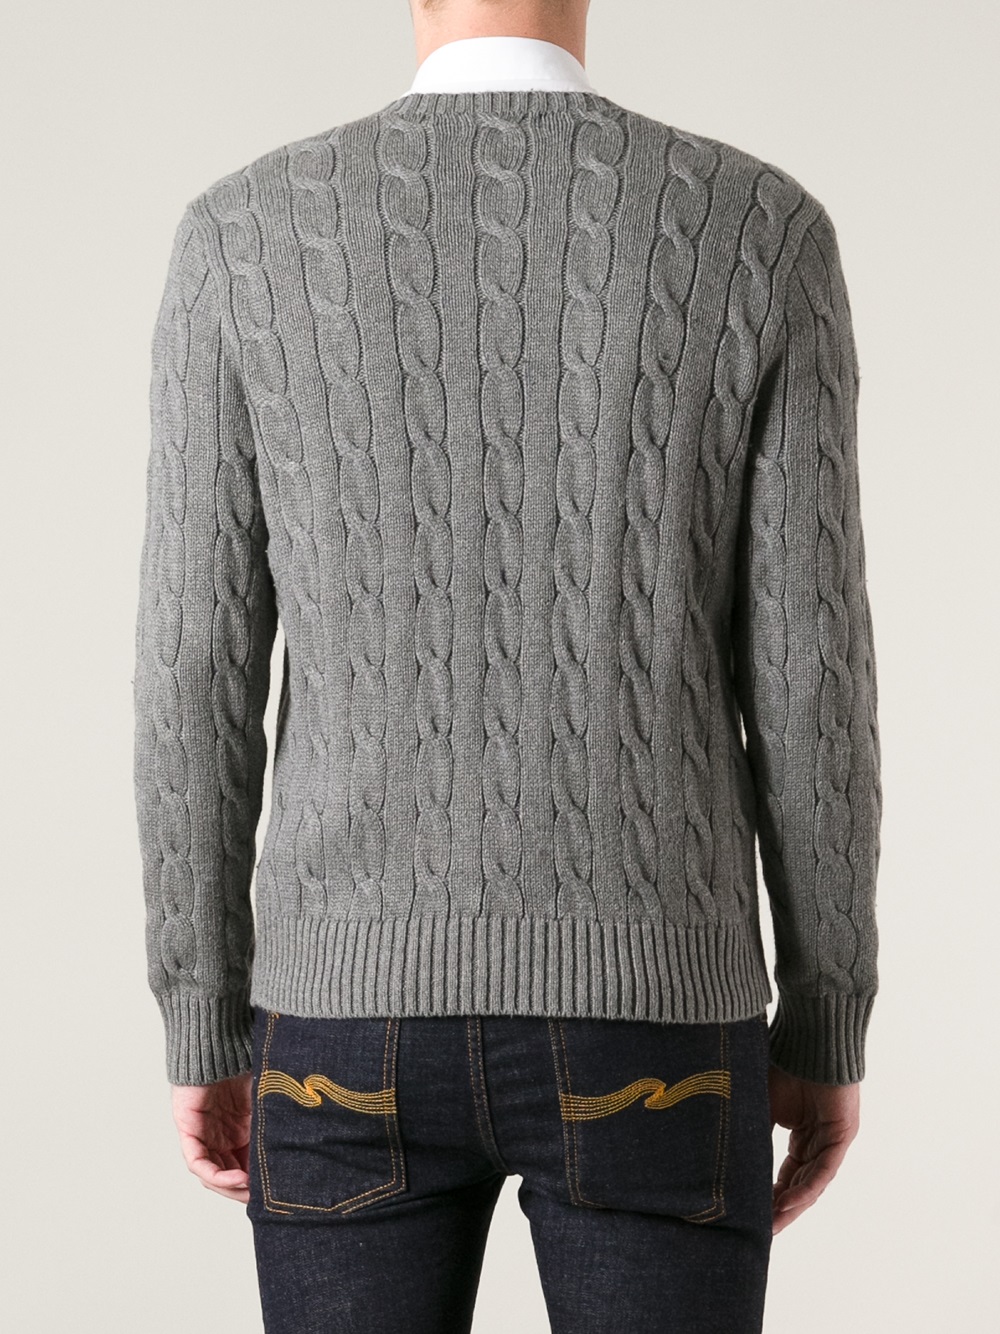 Lyst - Polo Ralph Lauren Cable Knit Sweater in Gray for Men